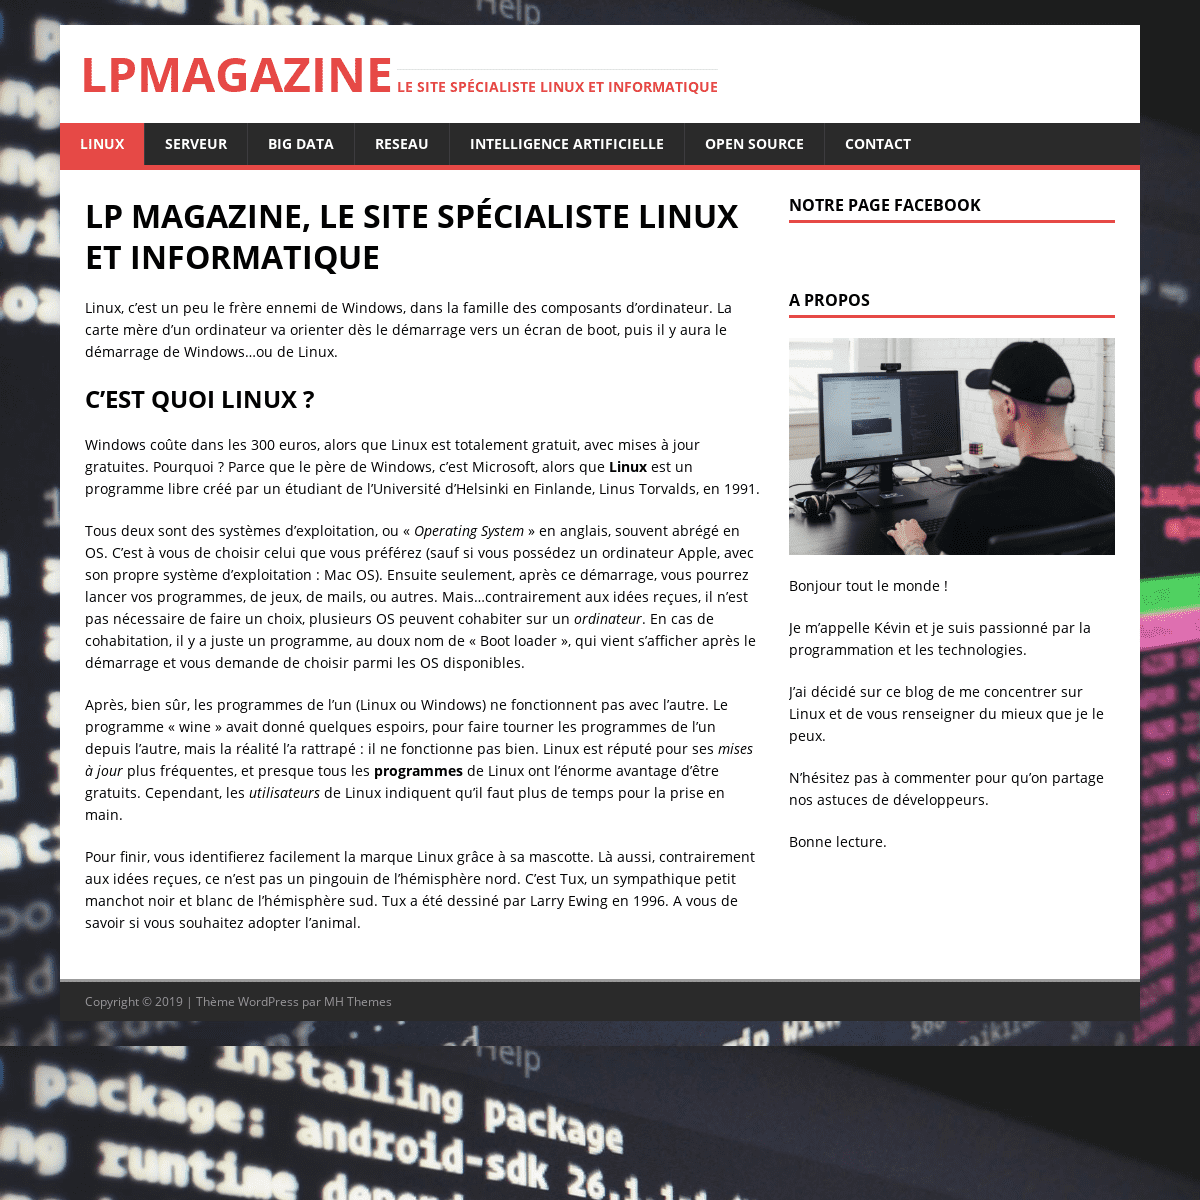 A complete backup of https://lpmagazine.org